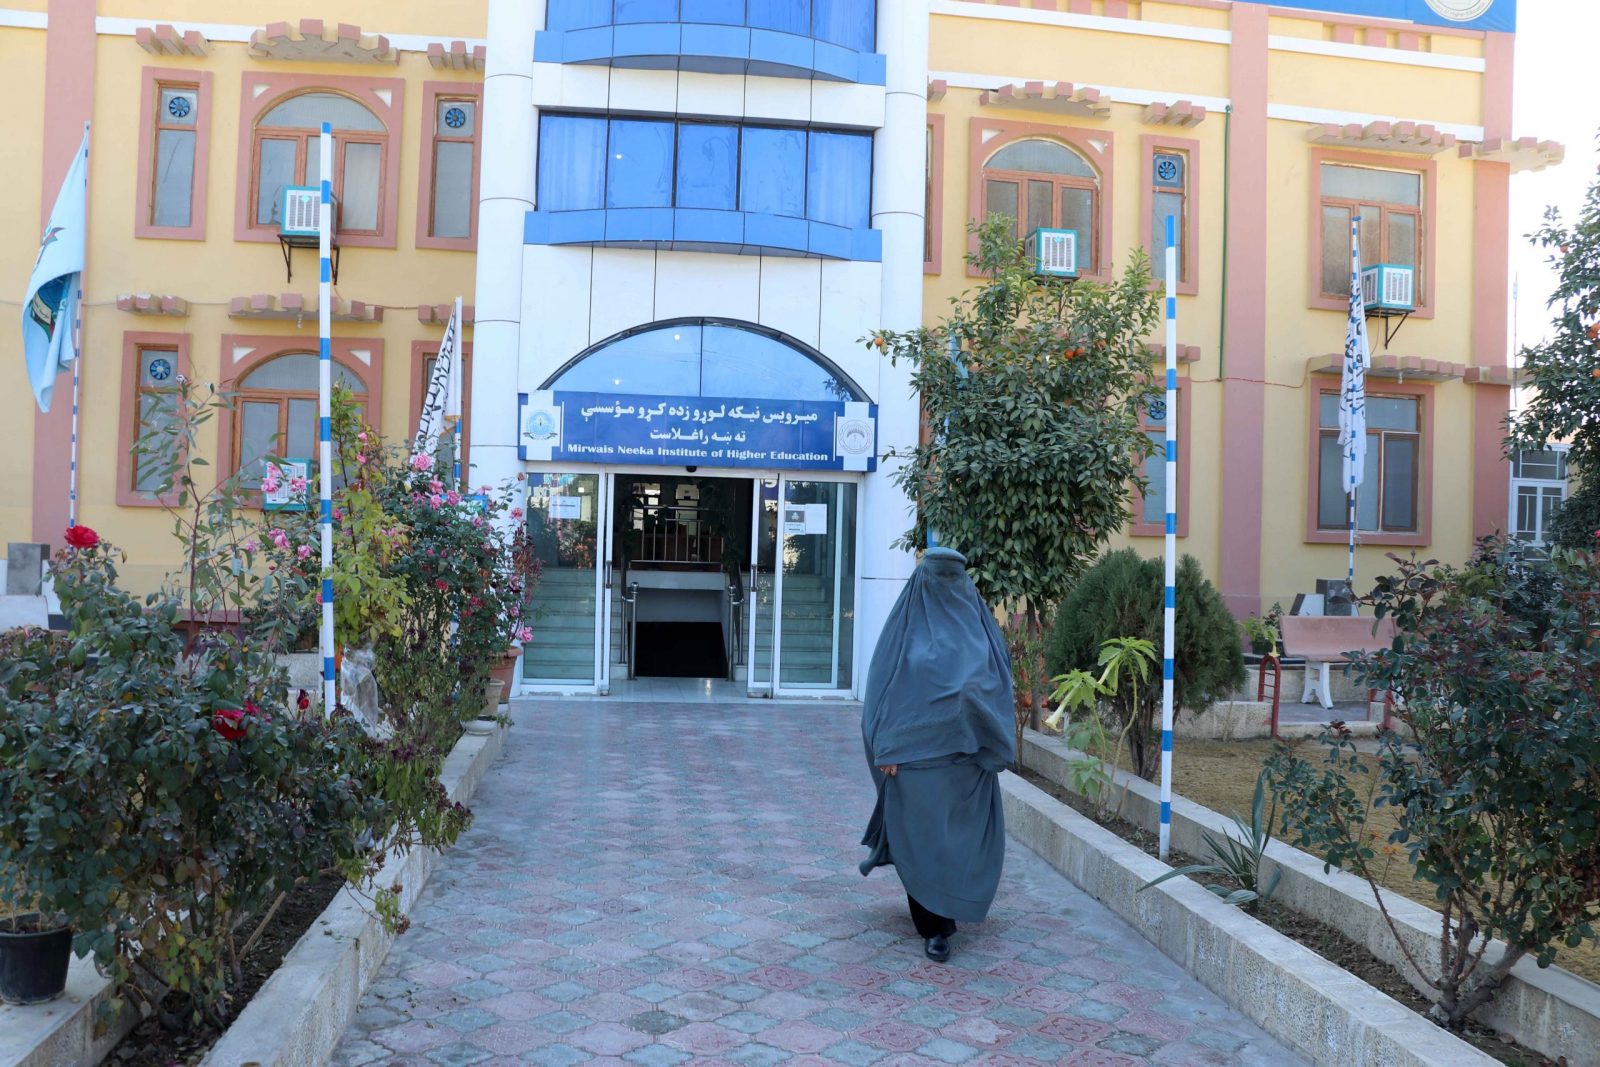 epa10375382 An Afghan female student leaves the Mirwais Neeka Institute of Higher Education in Kandahar, Afghanistan, 21 December 2022. The ruling Taliban has banned women from attending university in Afghanistan, according to an order issued on 20 December 2022. After regaining power, the Taliban initially insisted that women's rights would not be hindered, before barring girls over the age of 12 from attending school earlier this year. The UN envoy to that country, Roza Otunbayeva, once again condemned the closure of secondary schools for girls, a move which she said would mean there would be no more female students eligible for university within two years.  EPA/STRINGER